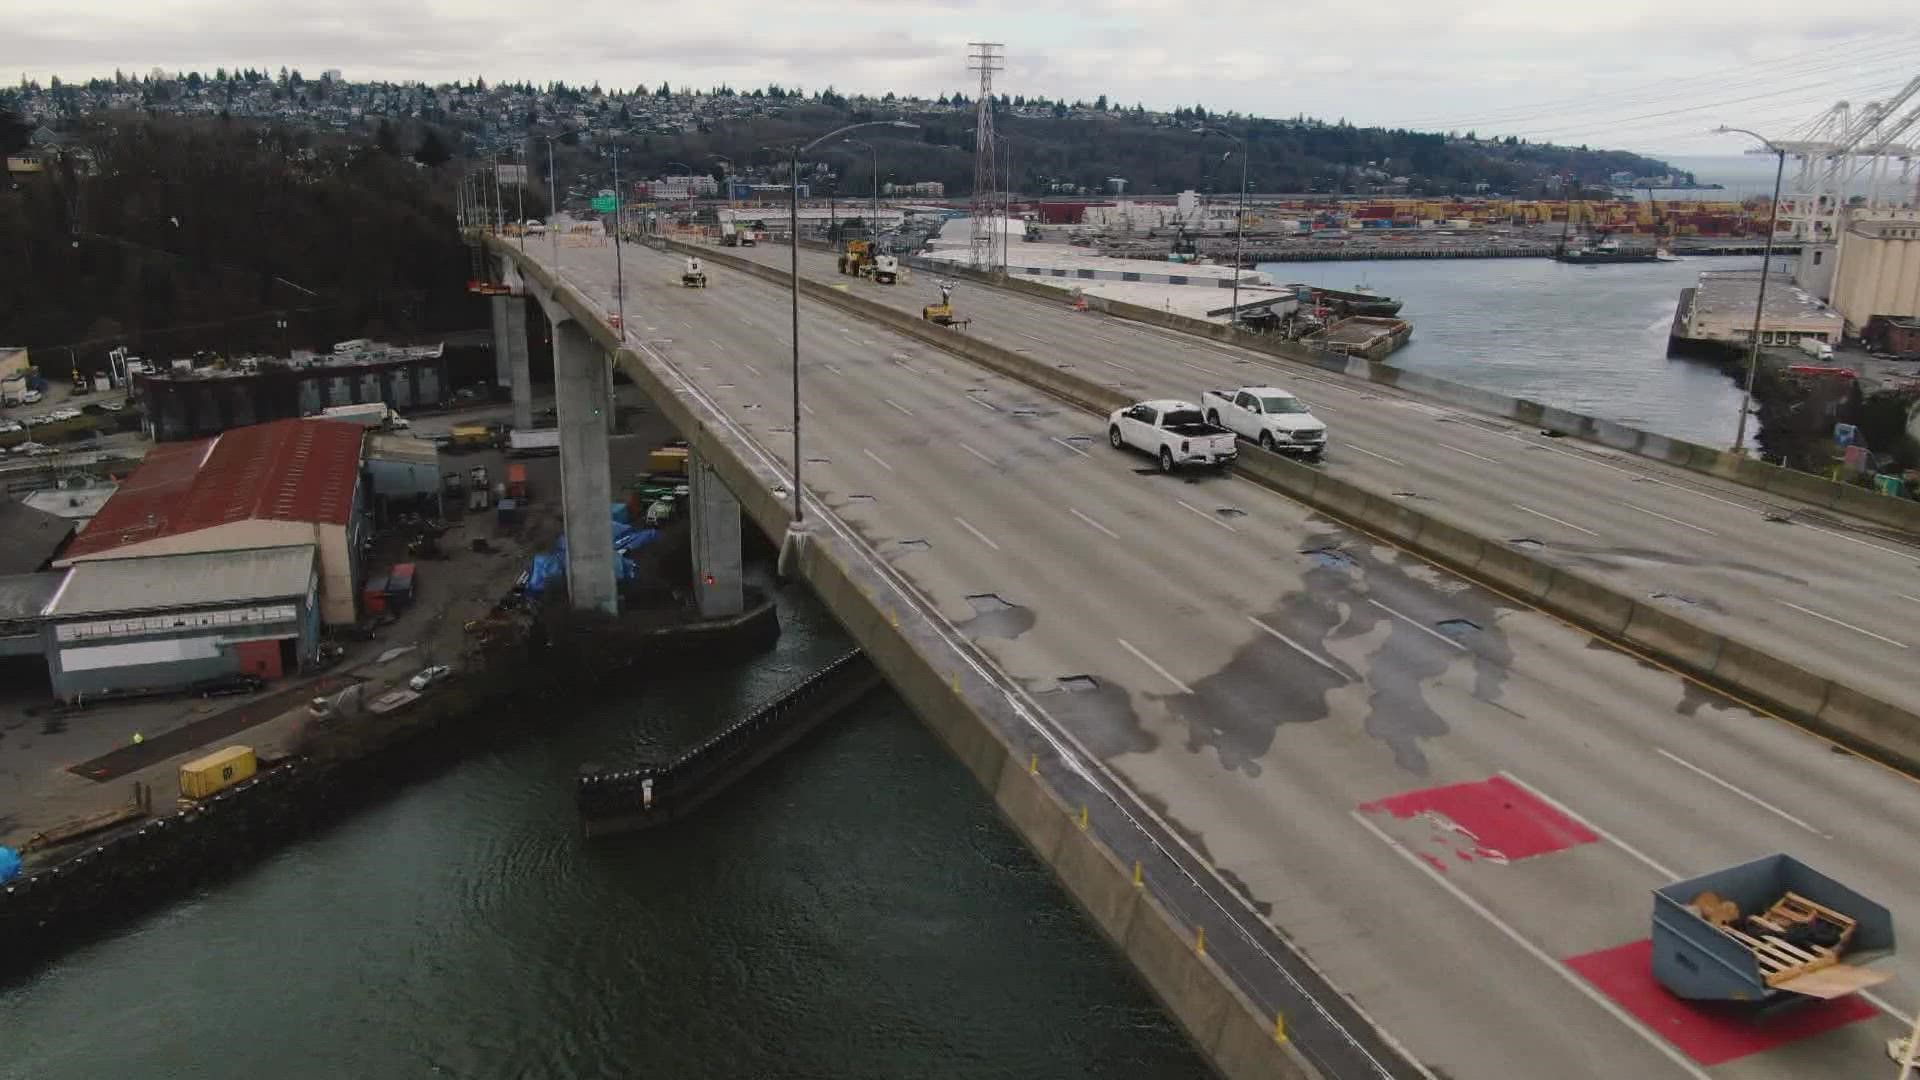 The director of the West Seattle Bridge Project said it takes months for the specialized concrete to cure.